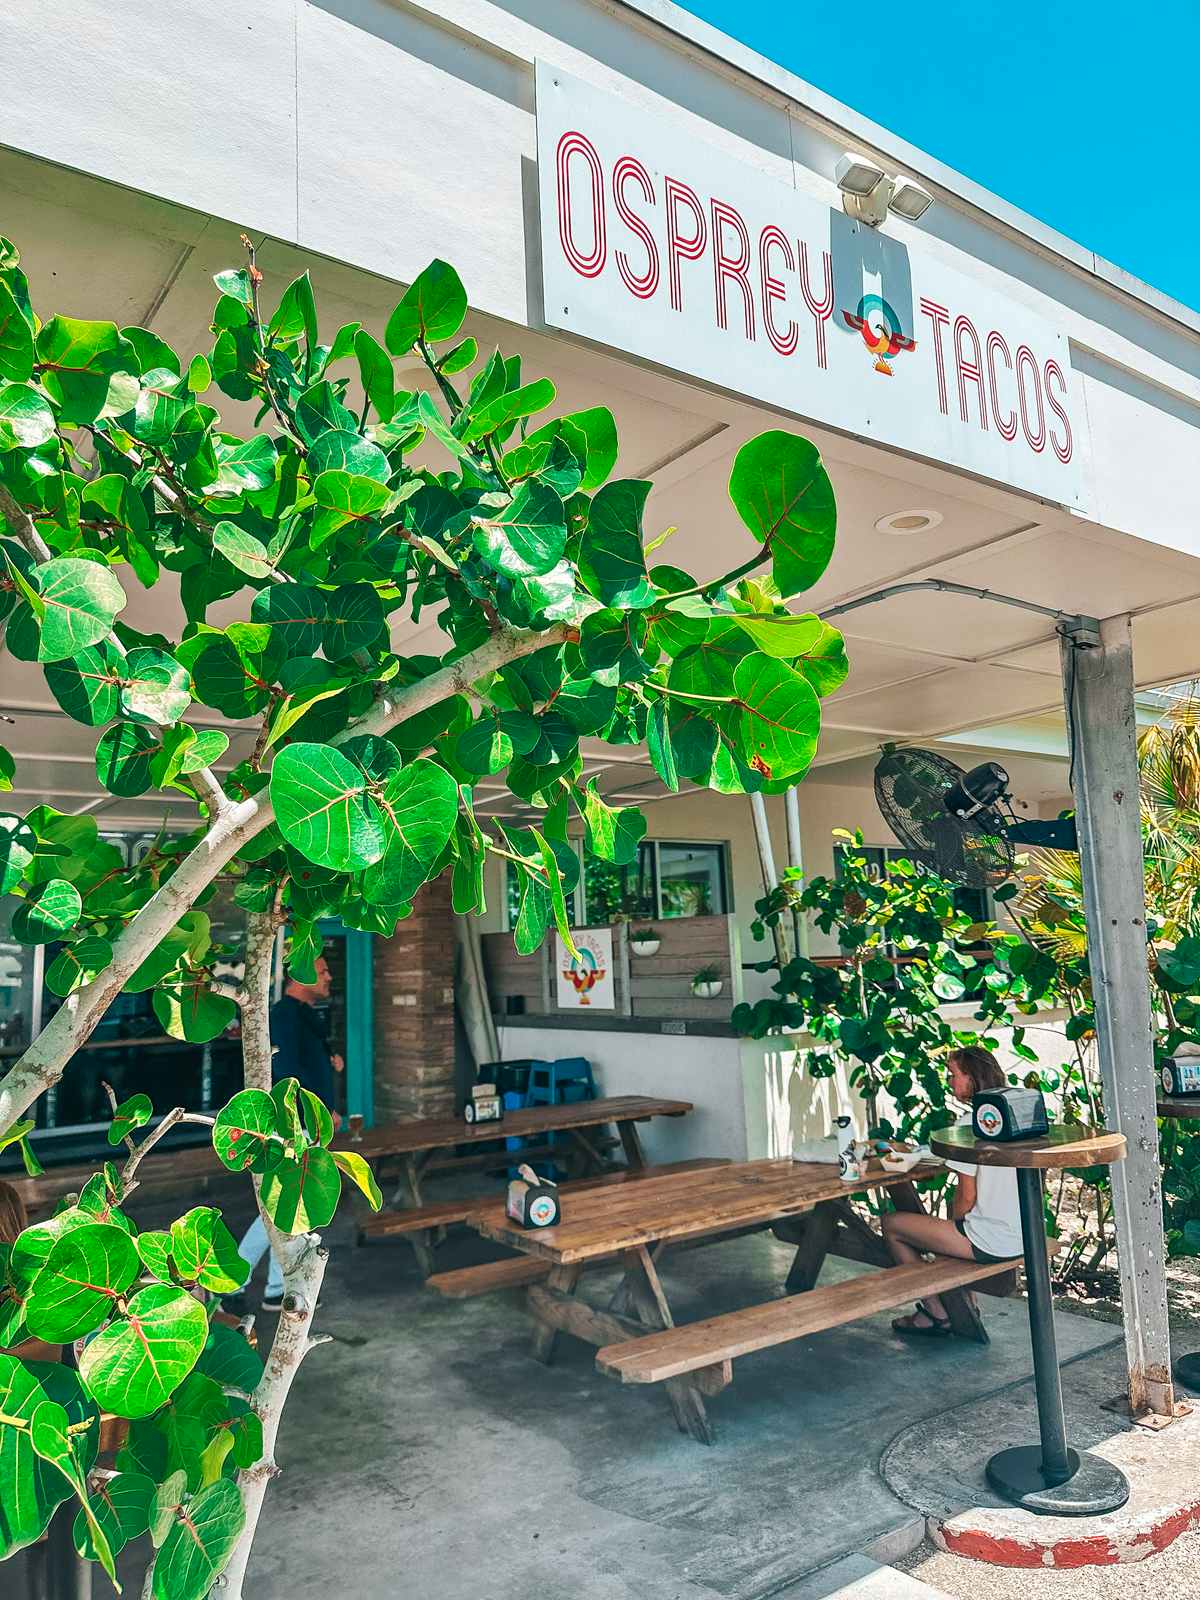 visit the Osprey Tacos when you spend a Weekend in St. Augustine